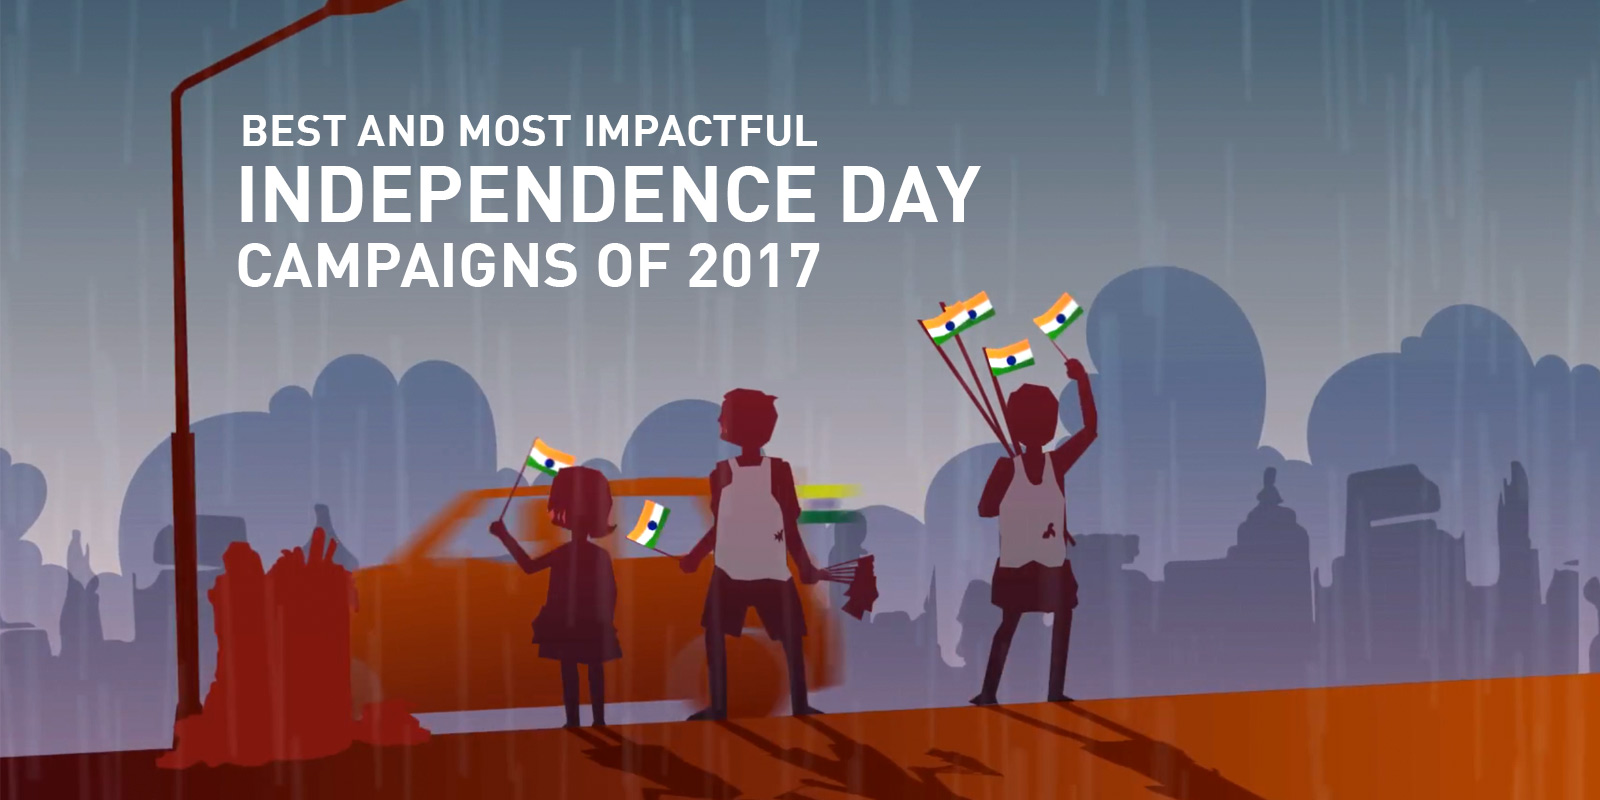 Independence Day campaigns of 2017